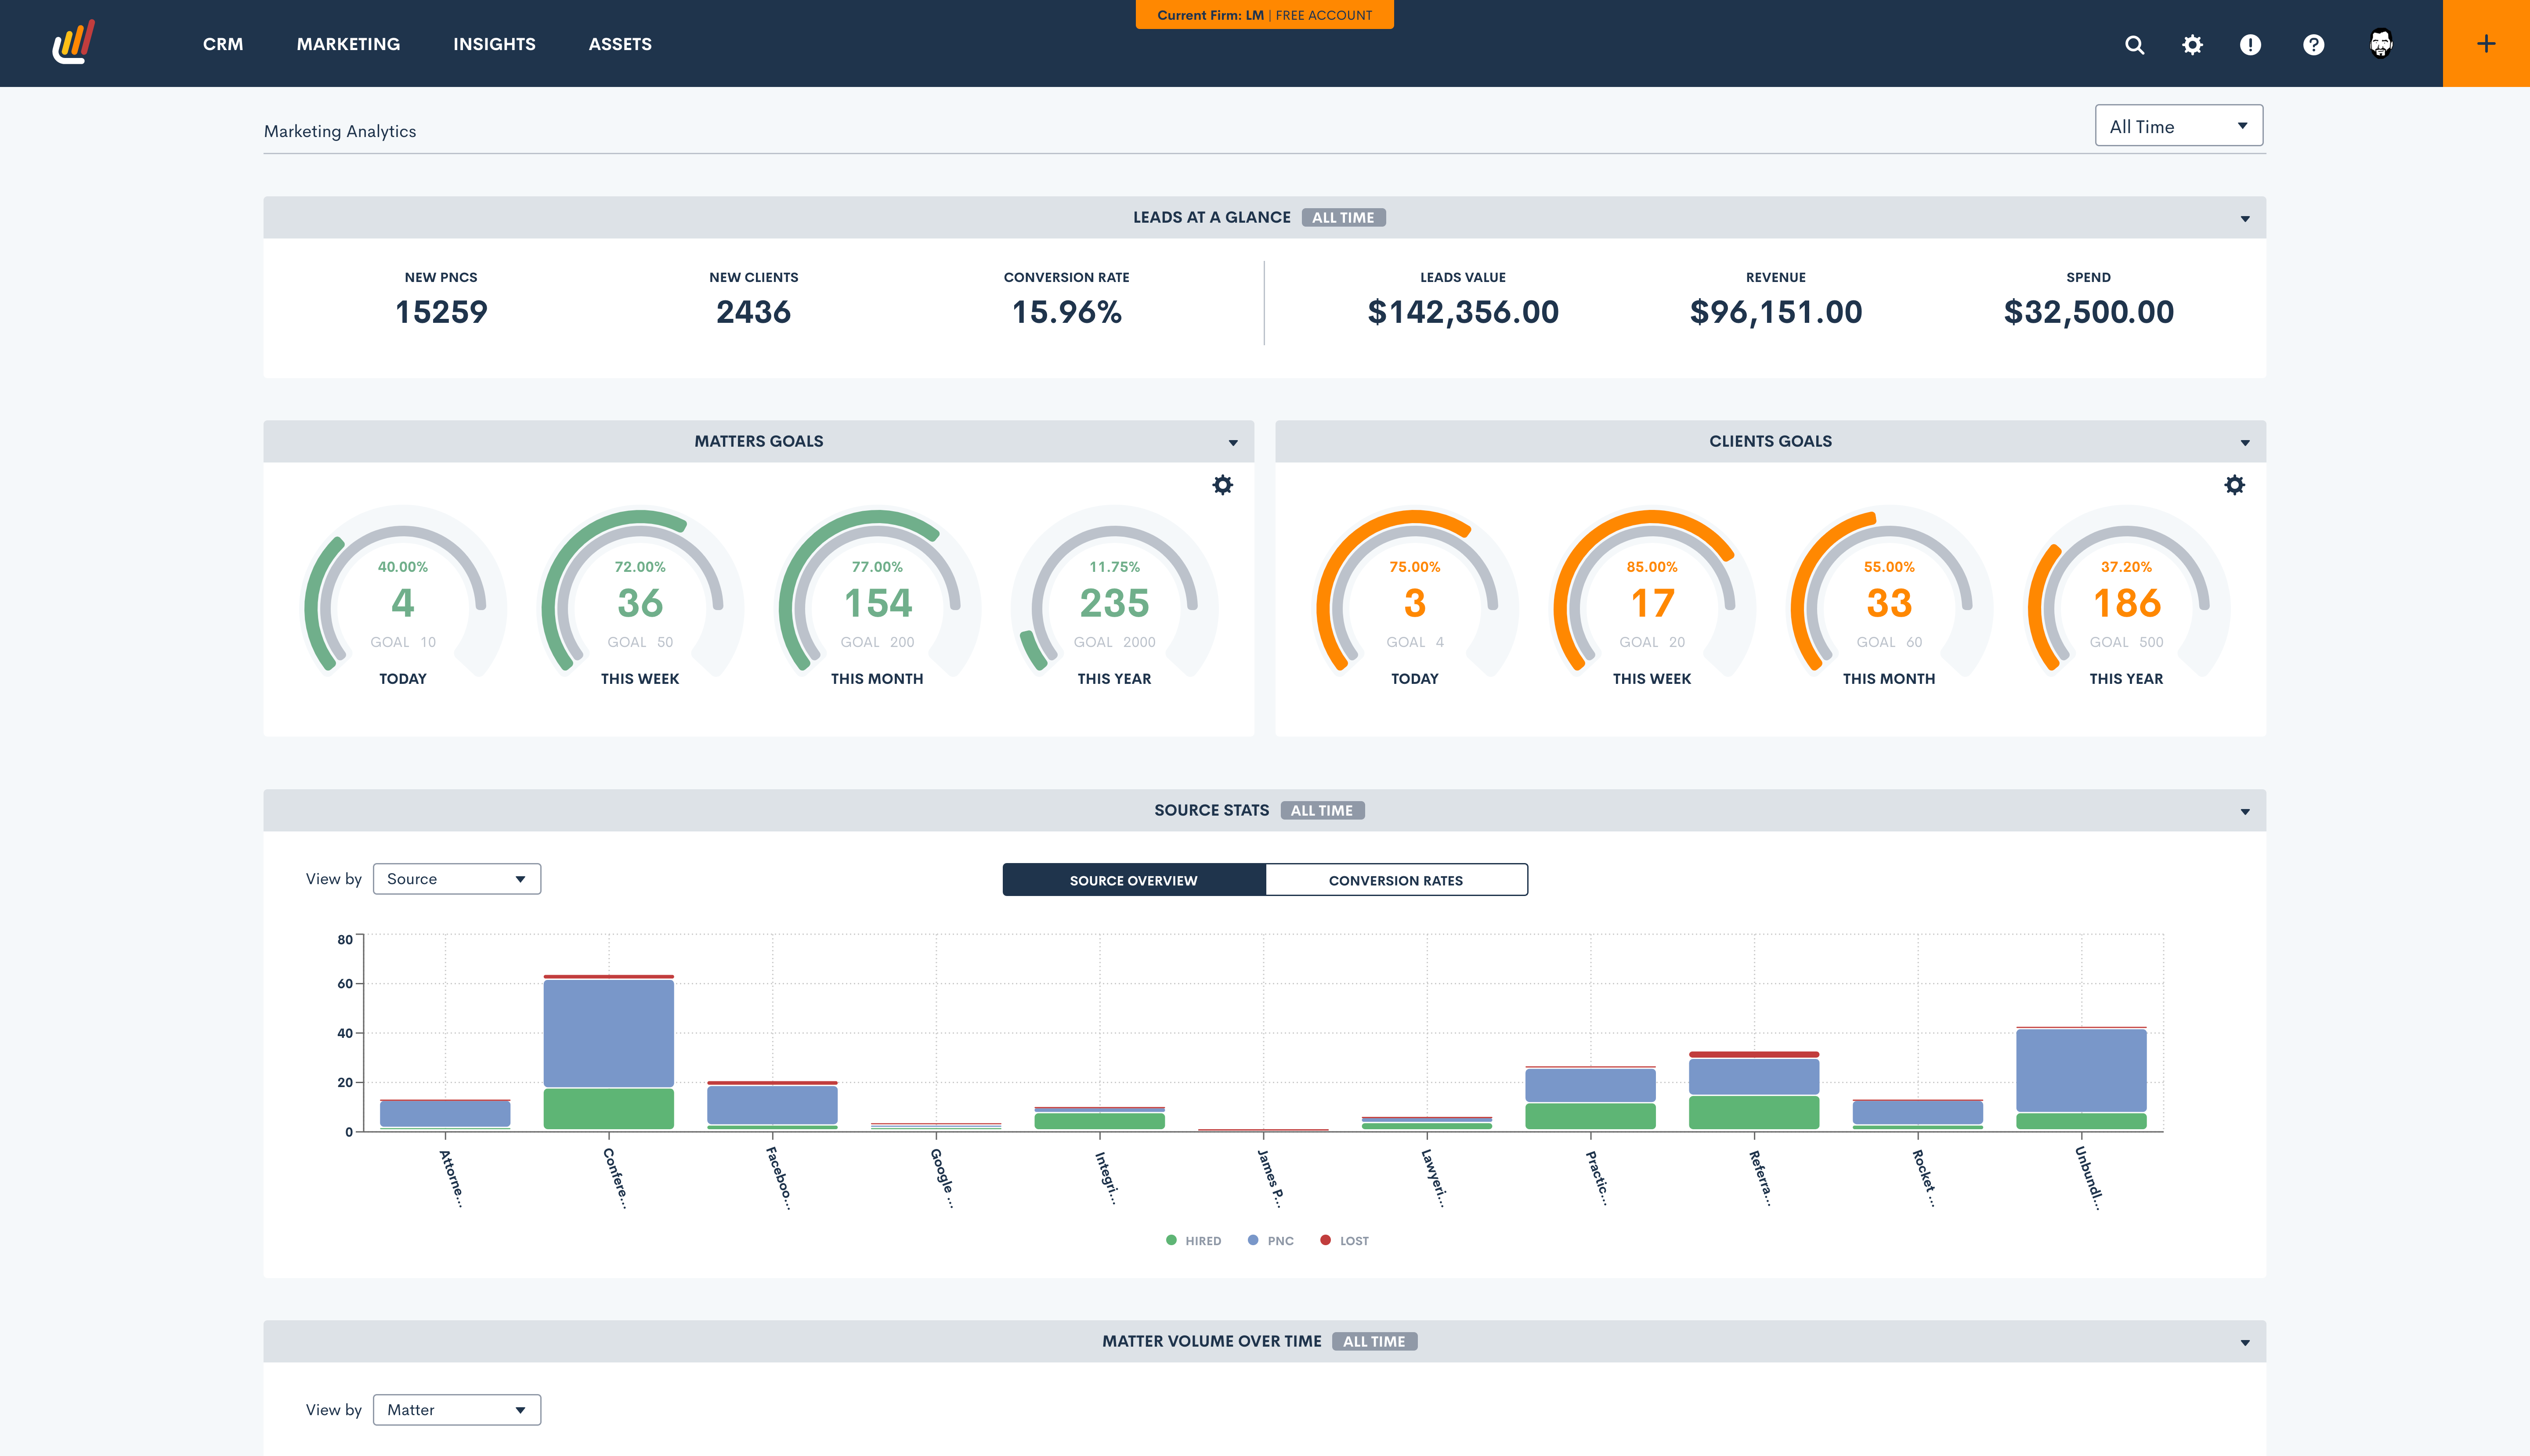 The analytics dashboard is hardwired to give you the data you need in an easily digestible format. Big picture stats and KPIs such as how many leads came into the firm, conv. rates, forecasting, goals, source tracking, etc can all be tracked in one place.